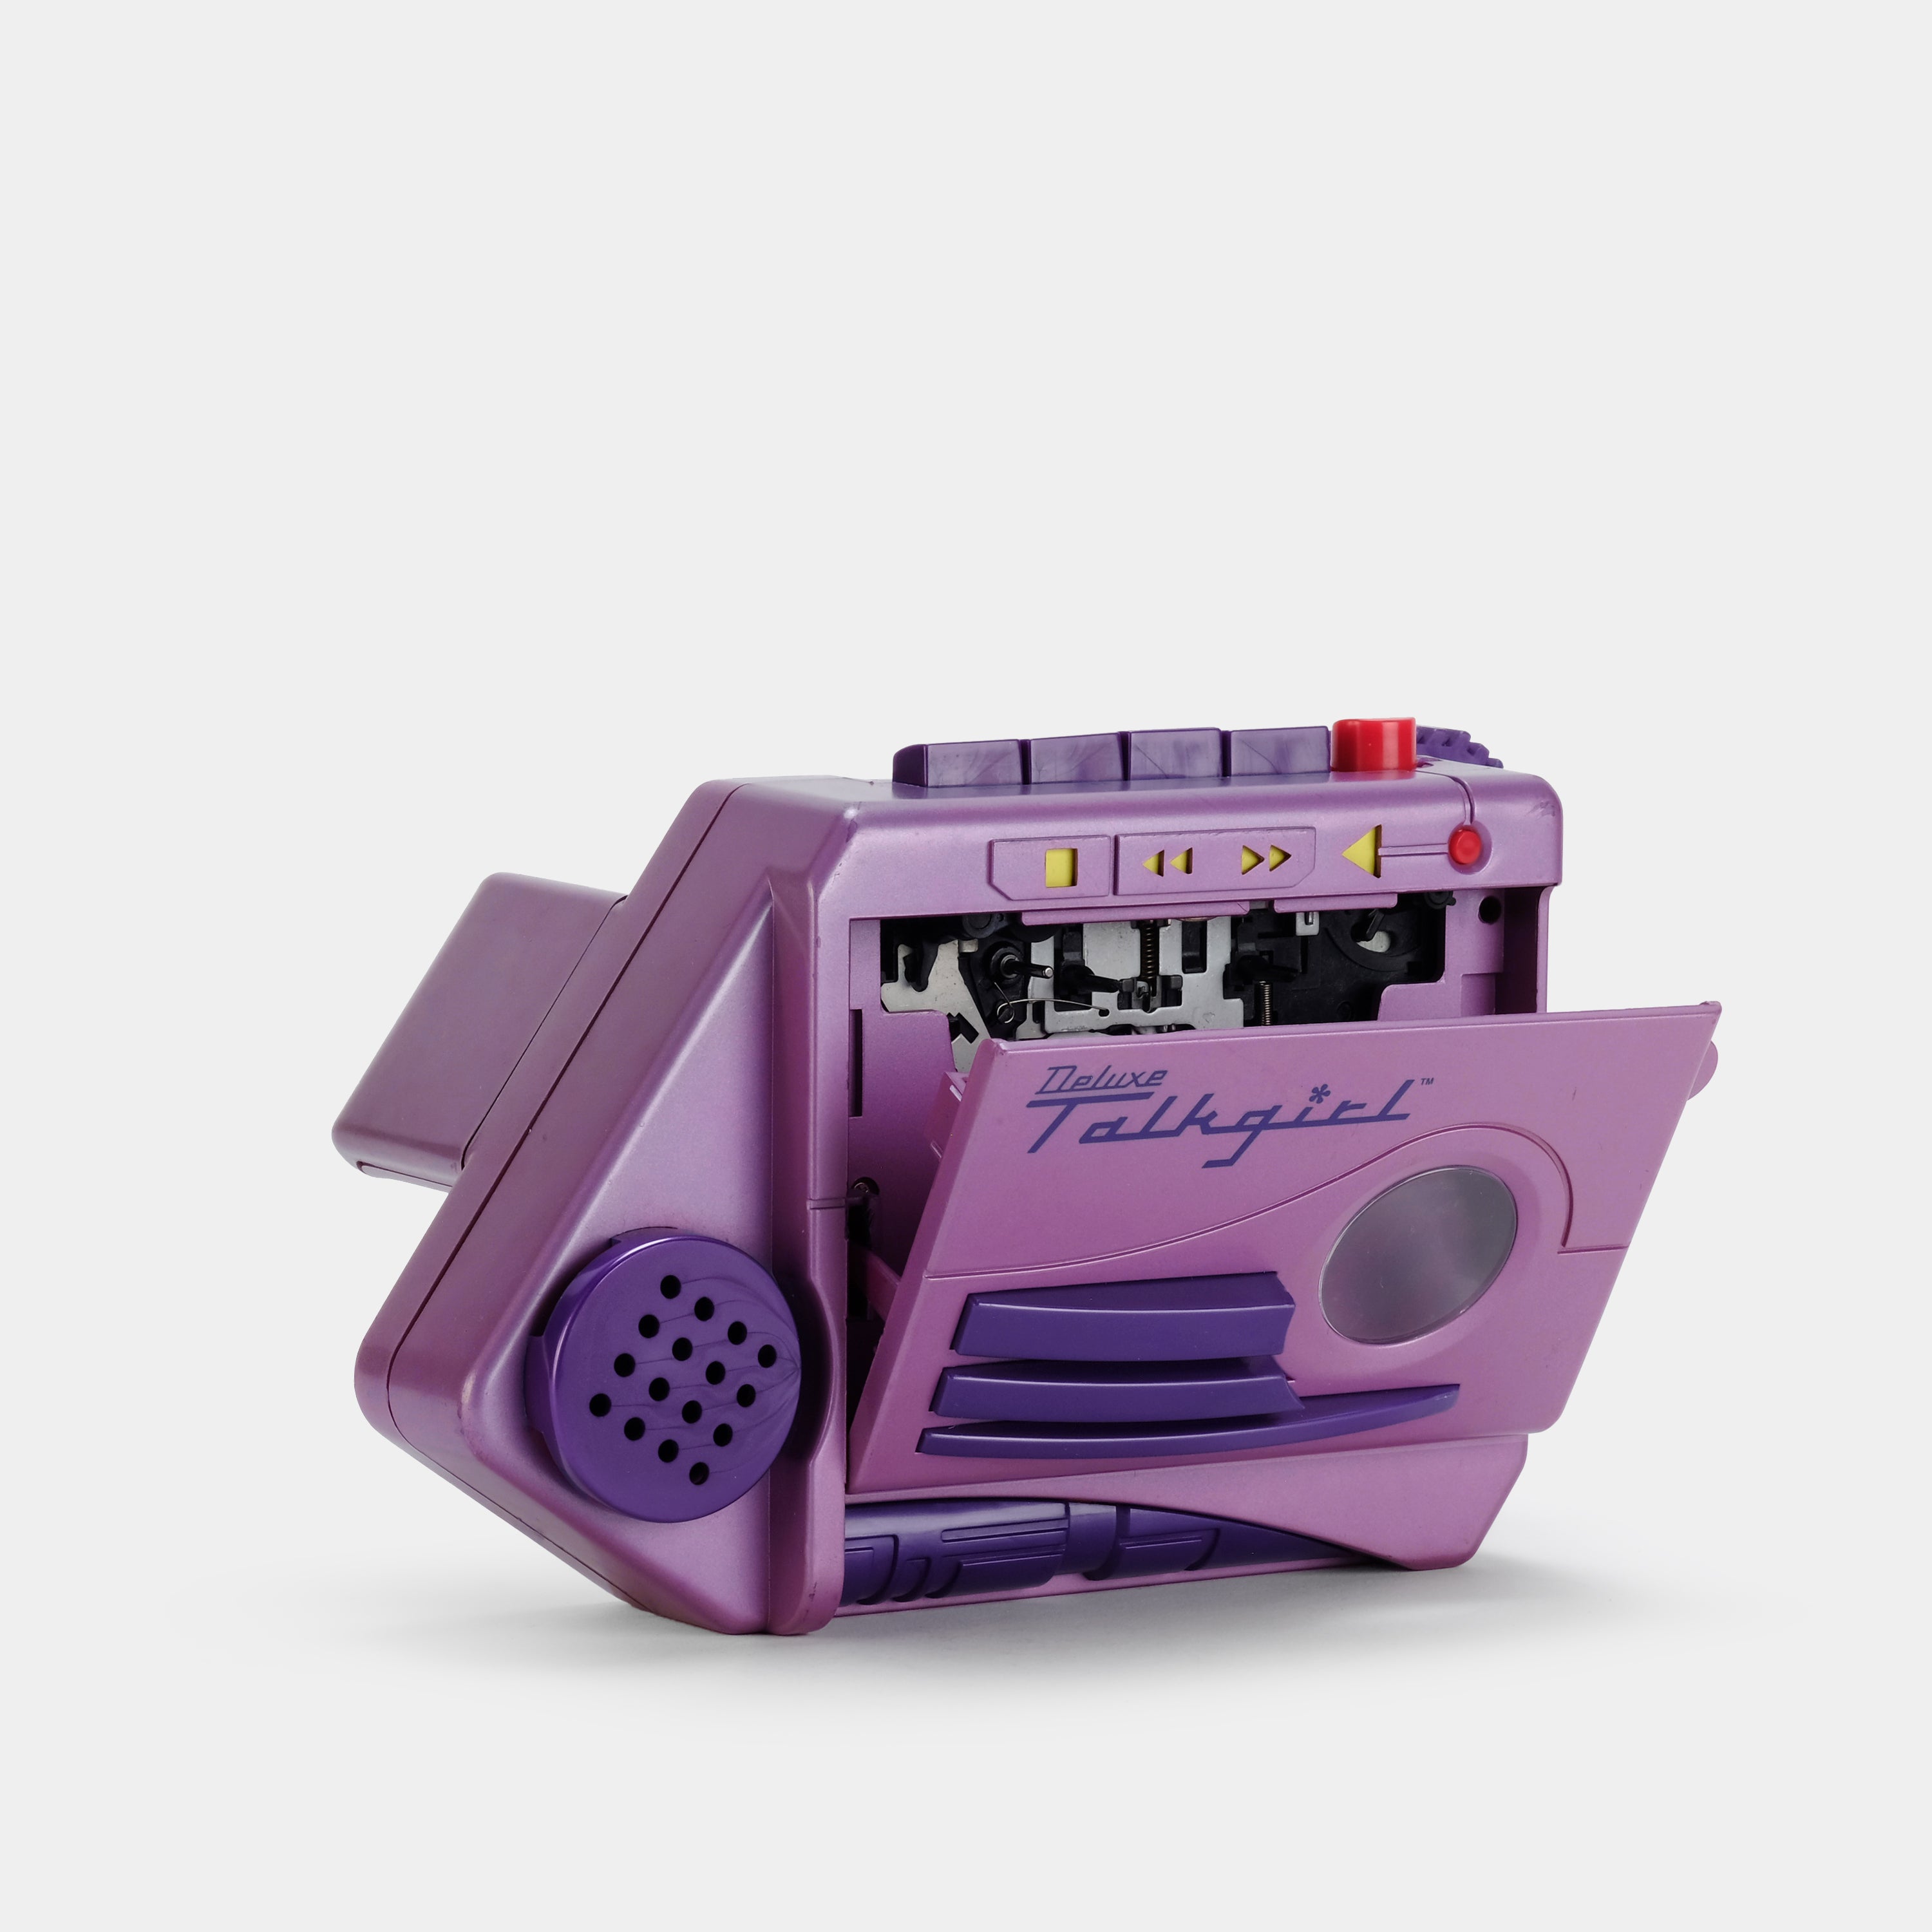 Deluxe Talkgirl Portable Cassette Recorder with Voice Changer